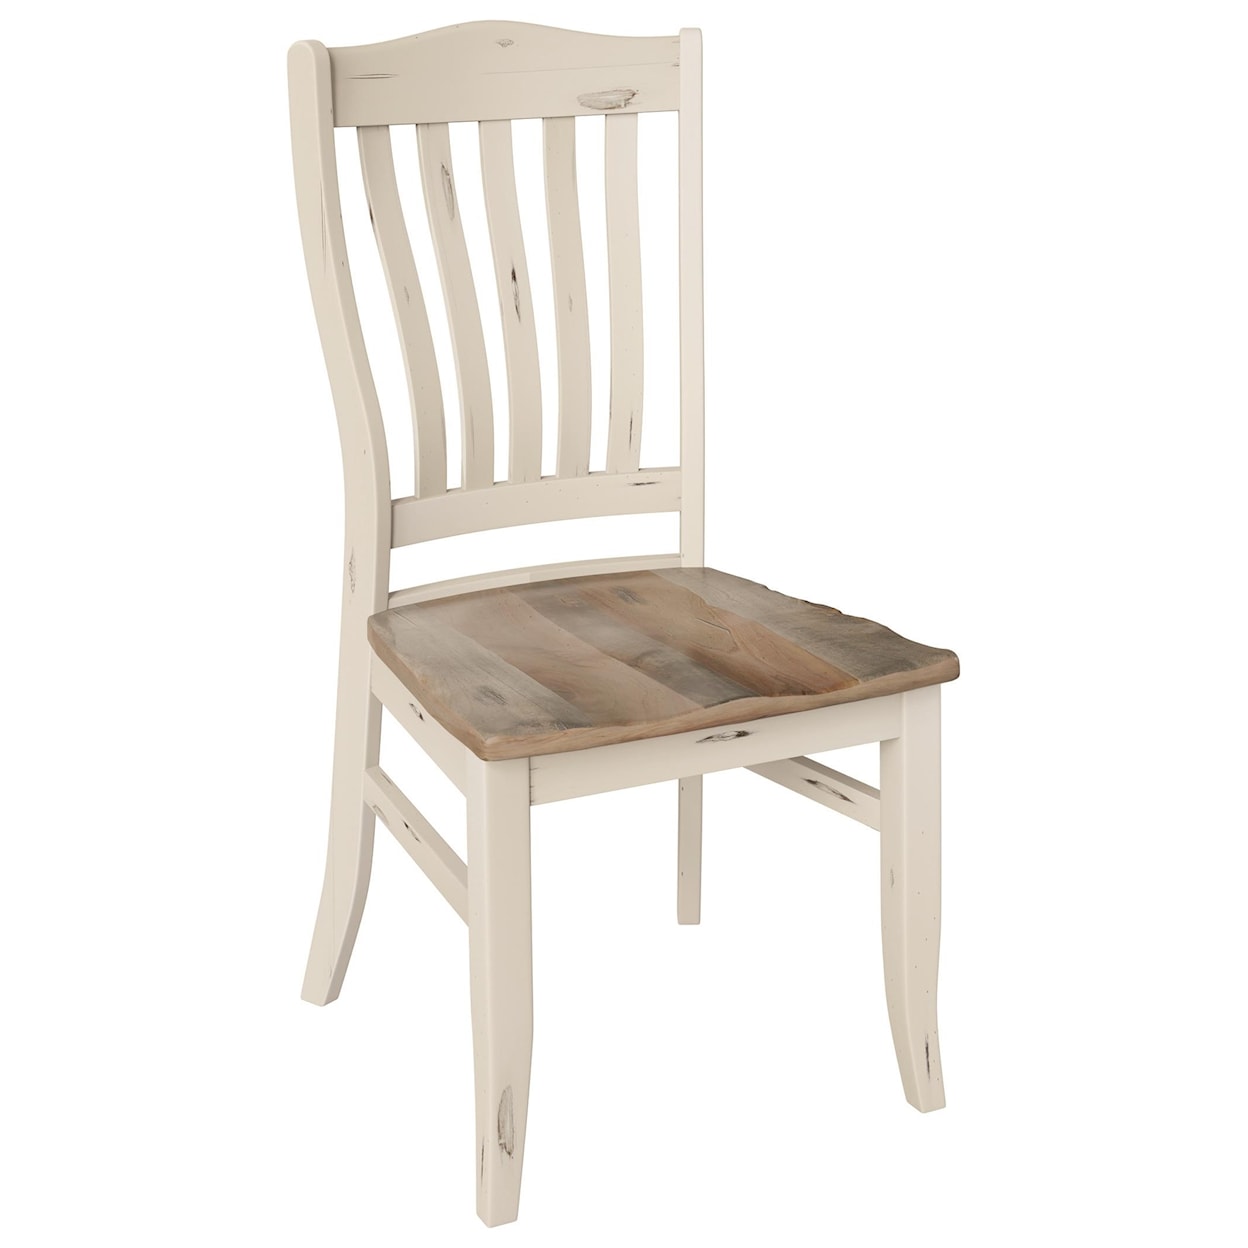 Wengerd Wood Products Messner Side Chair